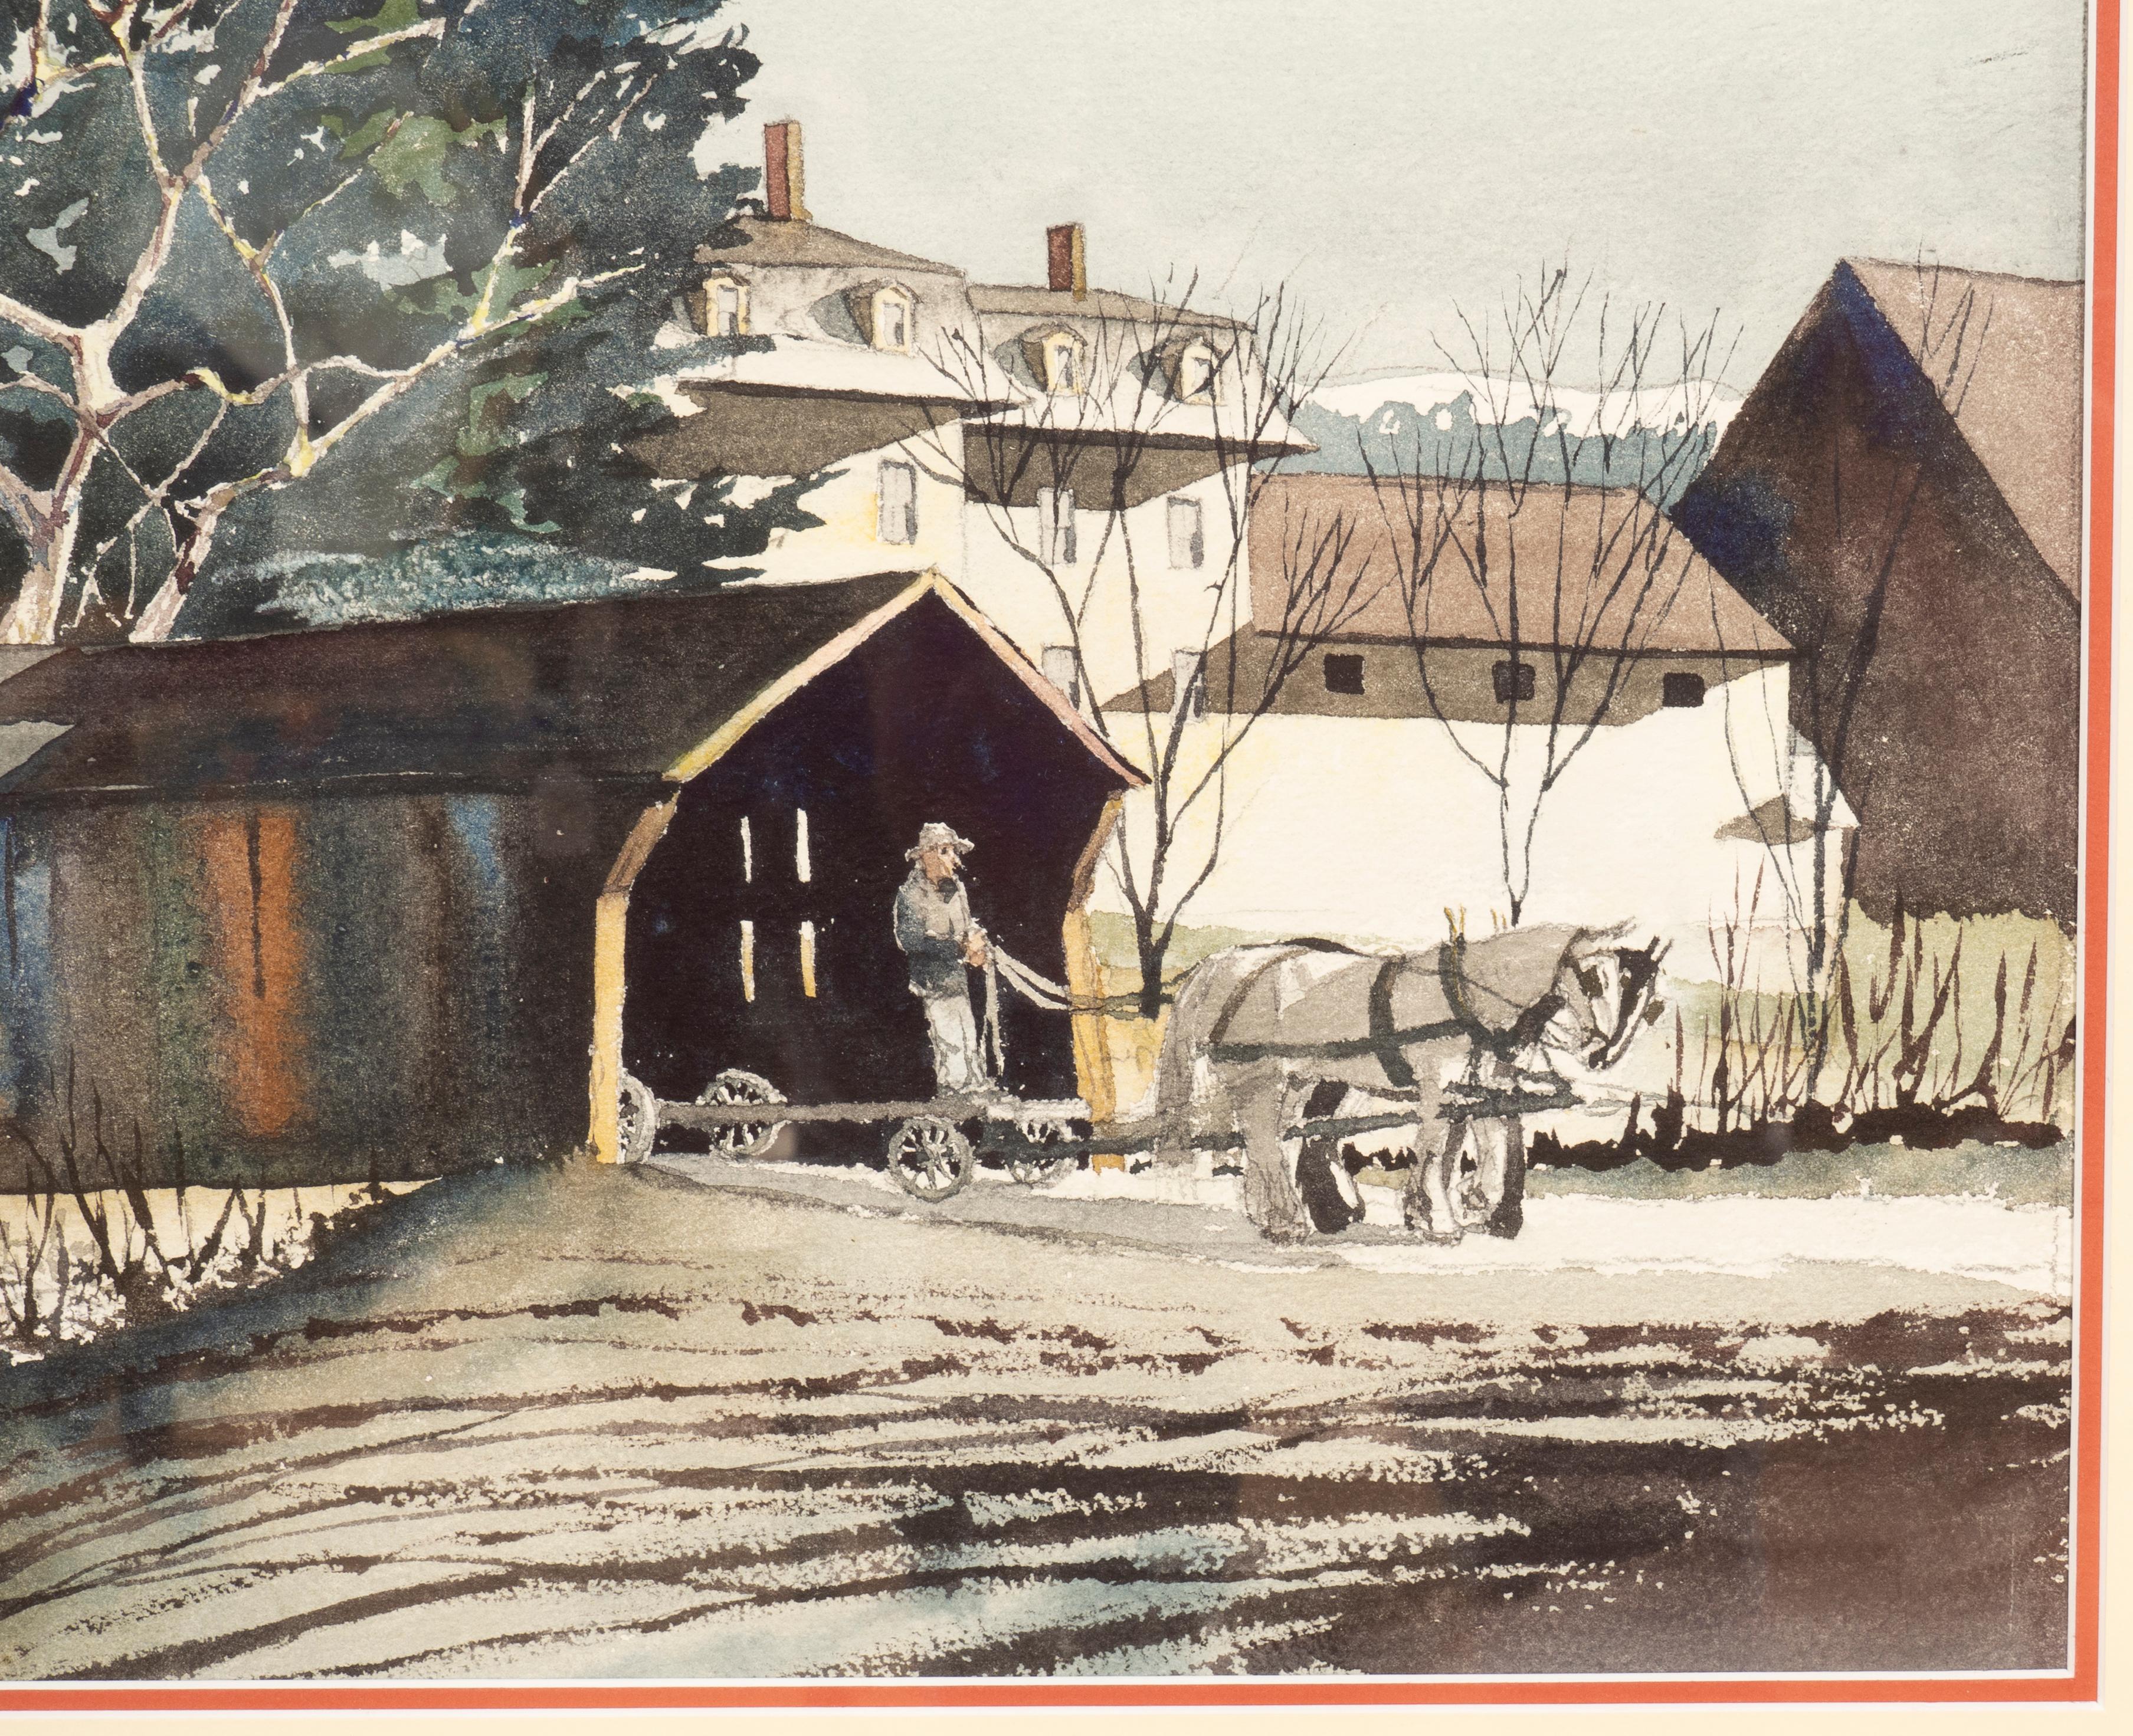 American Framed Watercolor Of A Covered Bridge In Moscow Vermont By Walton Blodgett